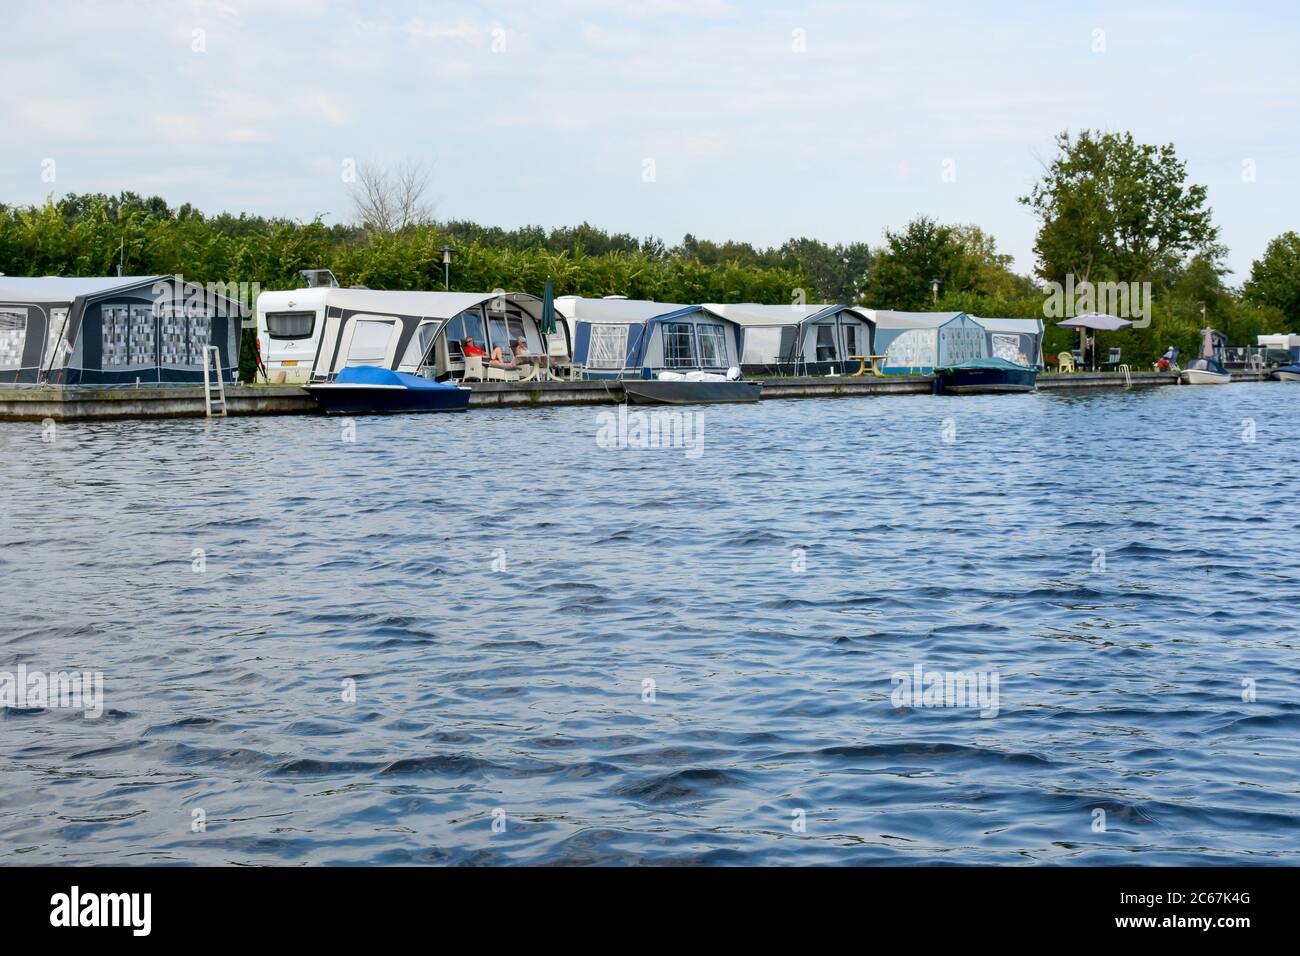 National Park Weerribben-Wieden, The Netherlands: People camping with a caravan next to a lake in National Park Weerribben-Wieden, The Netherlands Stock Photo